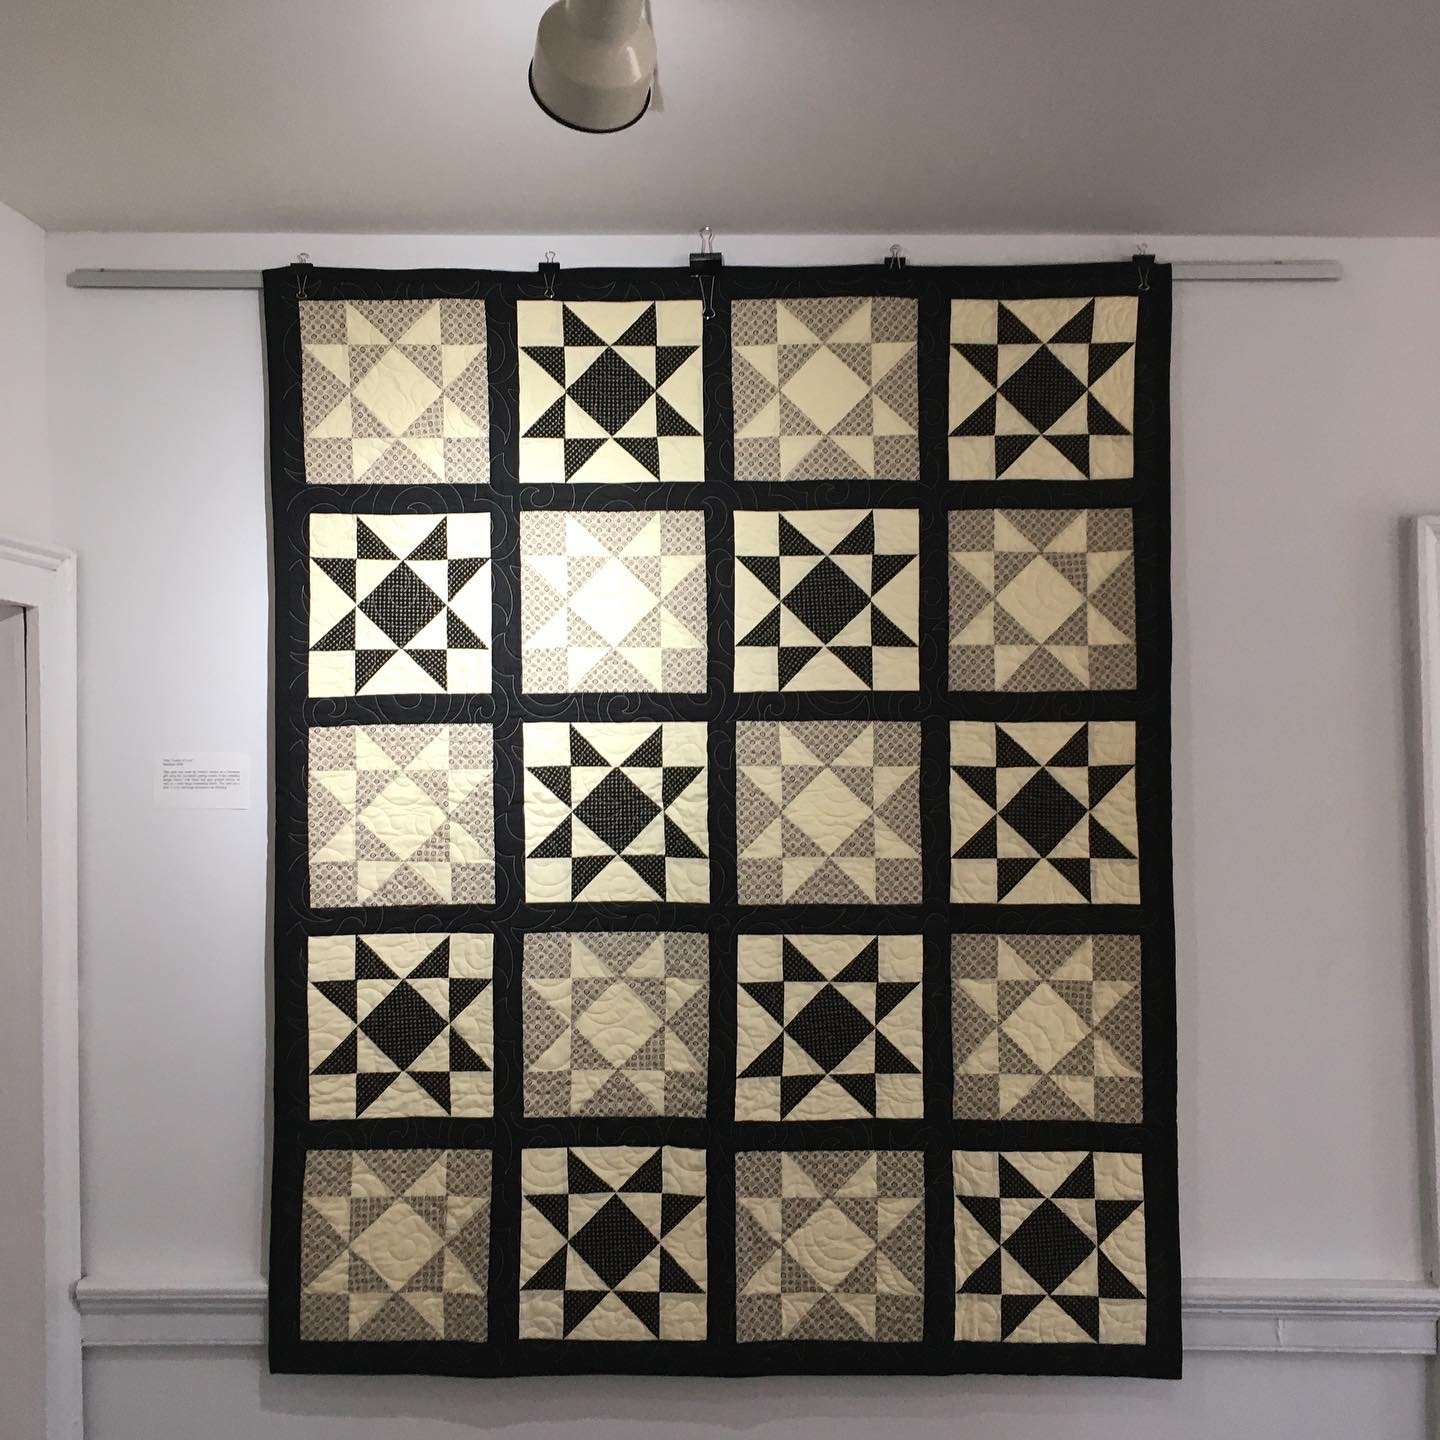 Quilt by Dedra Downes Hicks